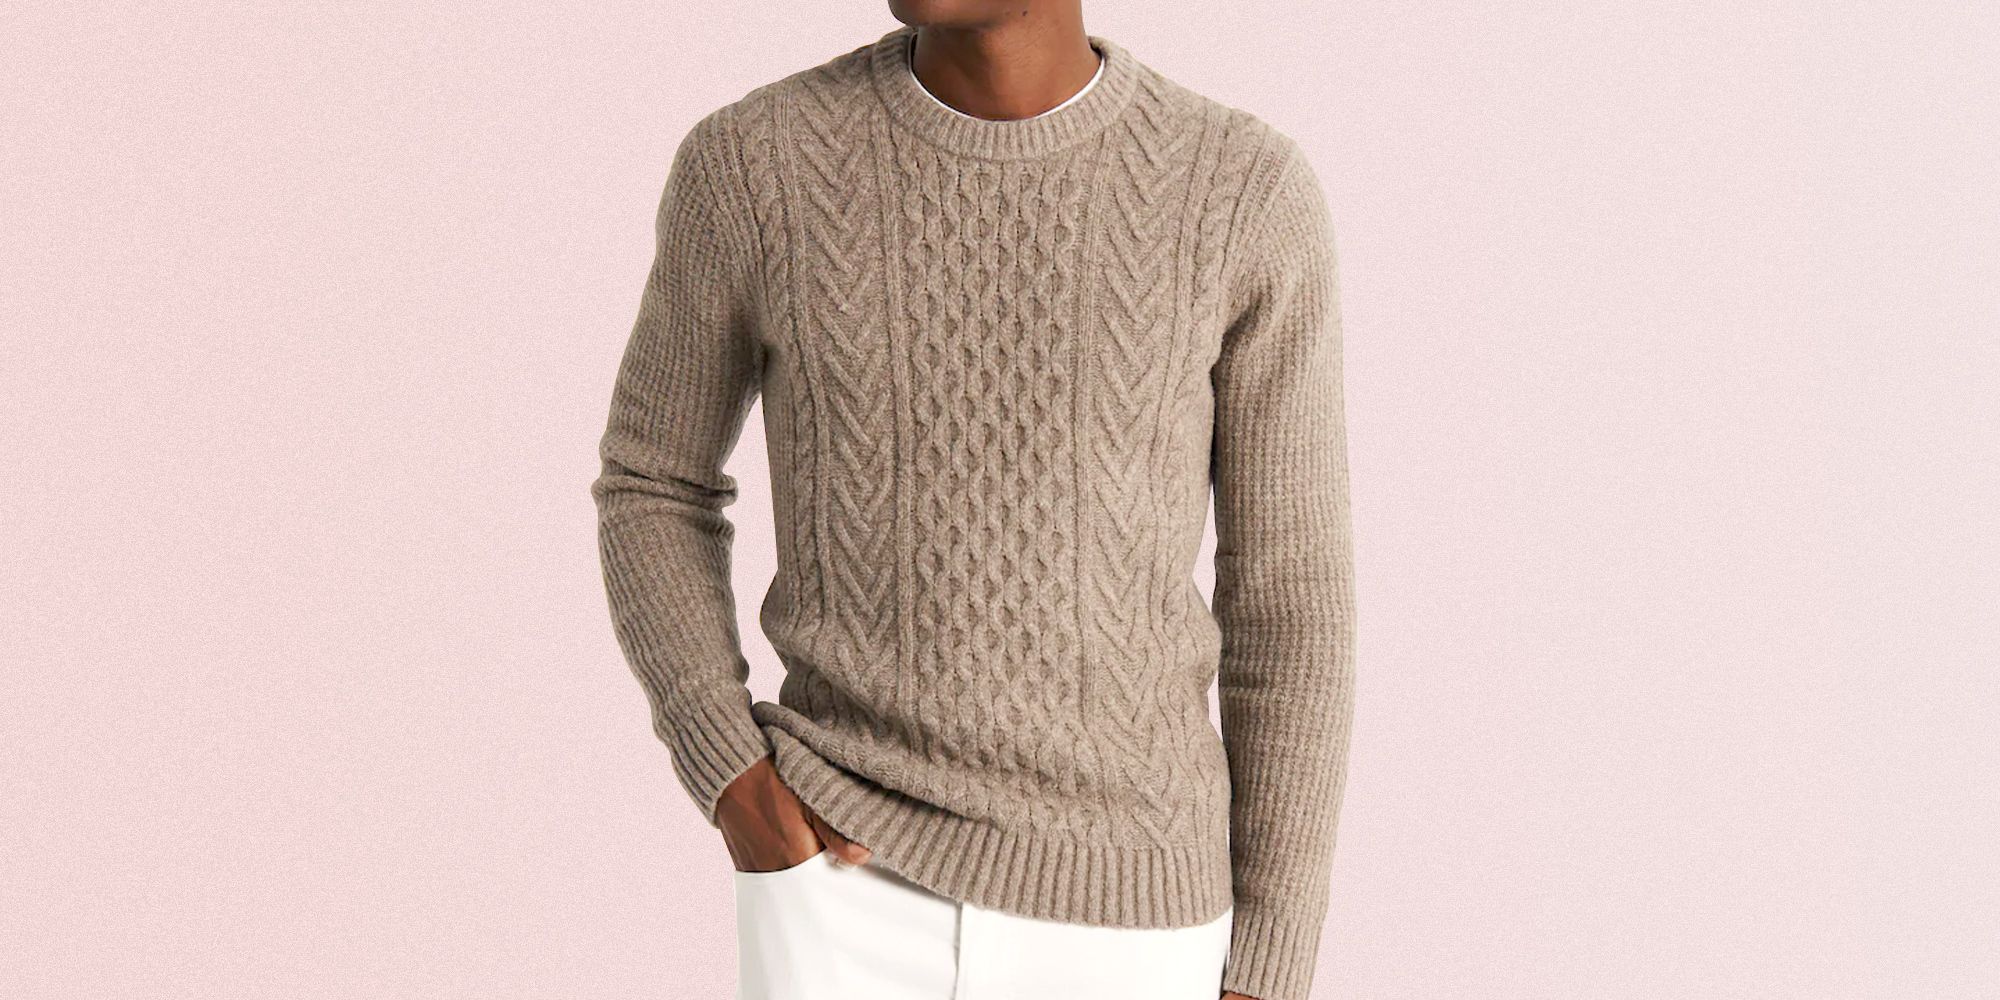 Miracle Mens Turtleneck Sweater Cable Knit Pullover Jumper Knitwear Sweater